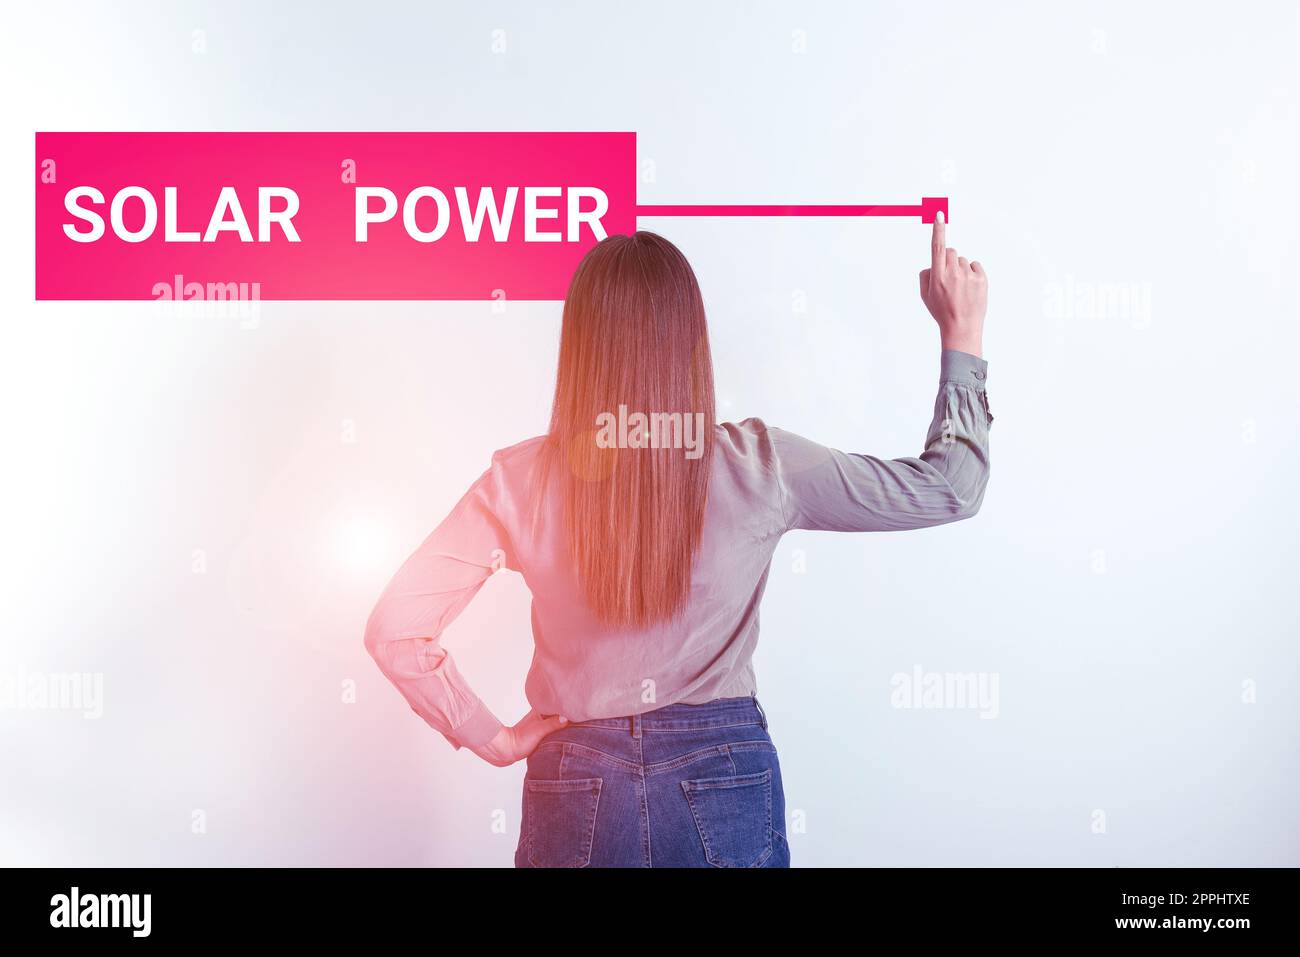 Sign displaying Solar Power. Business concept the electricity produced by using the energy from the sun Stock Photo